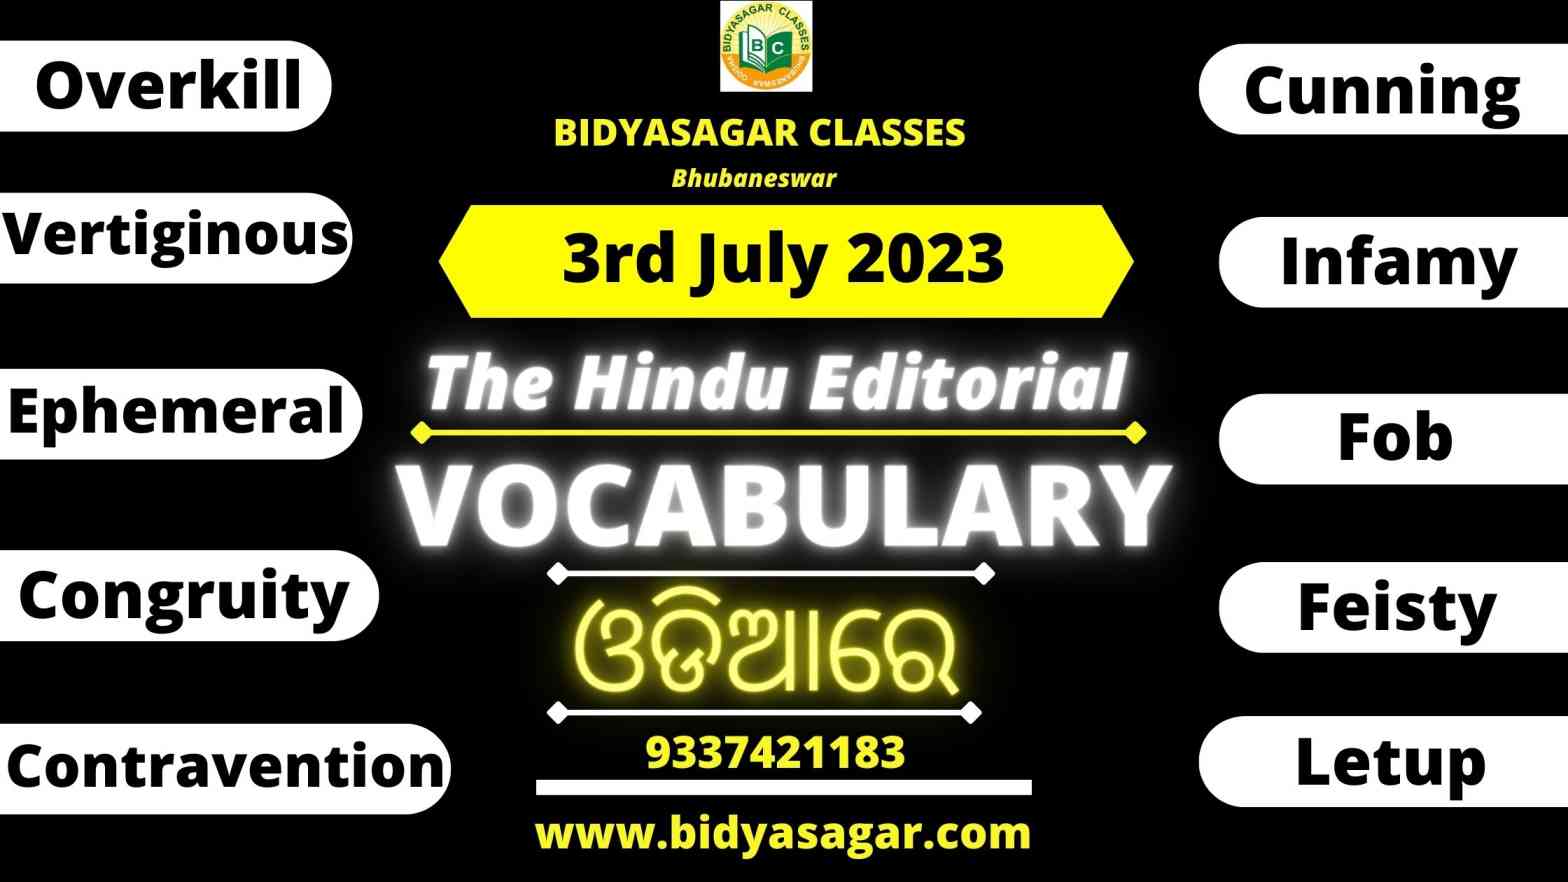 The Hindu Editorial Vocabulary of 3rd July 2023